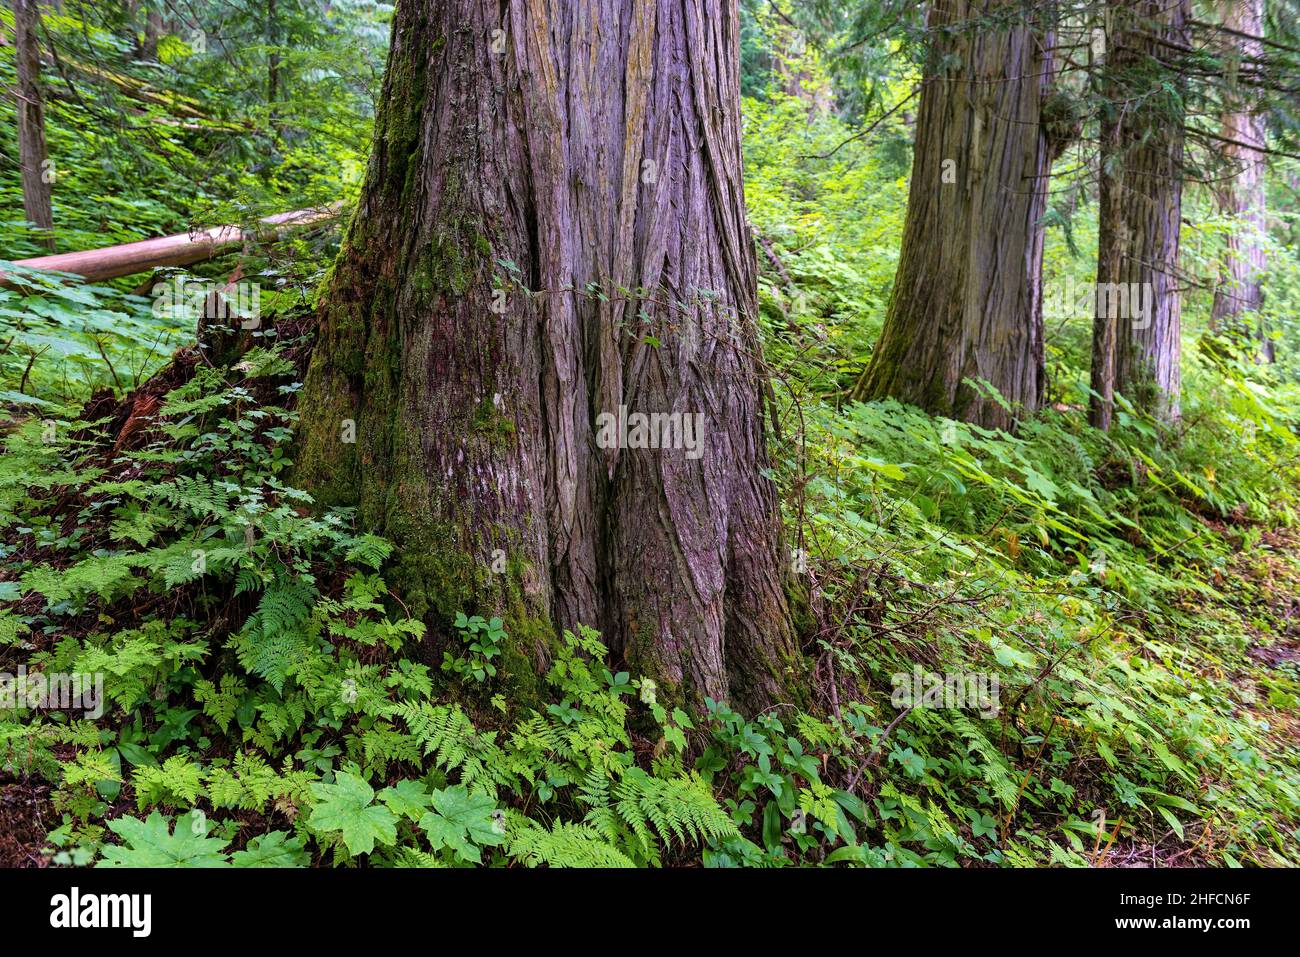 Cedar trees and ferns inside the Ancient Forest, Fraser River Valley near Prince George, British Columbia, Canada. Focus on closest cedar tree. Stock Photo